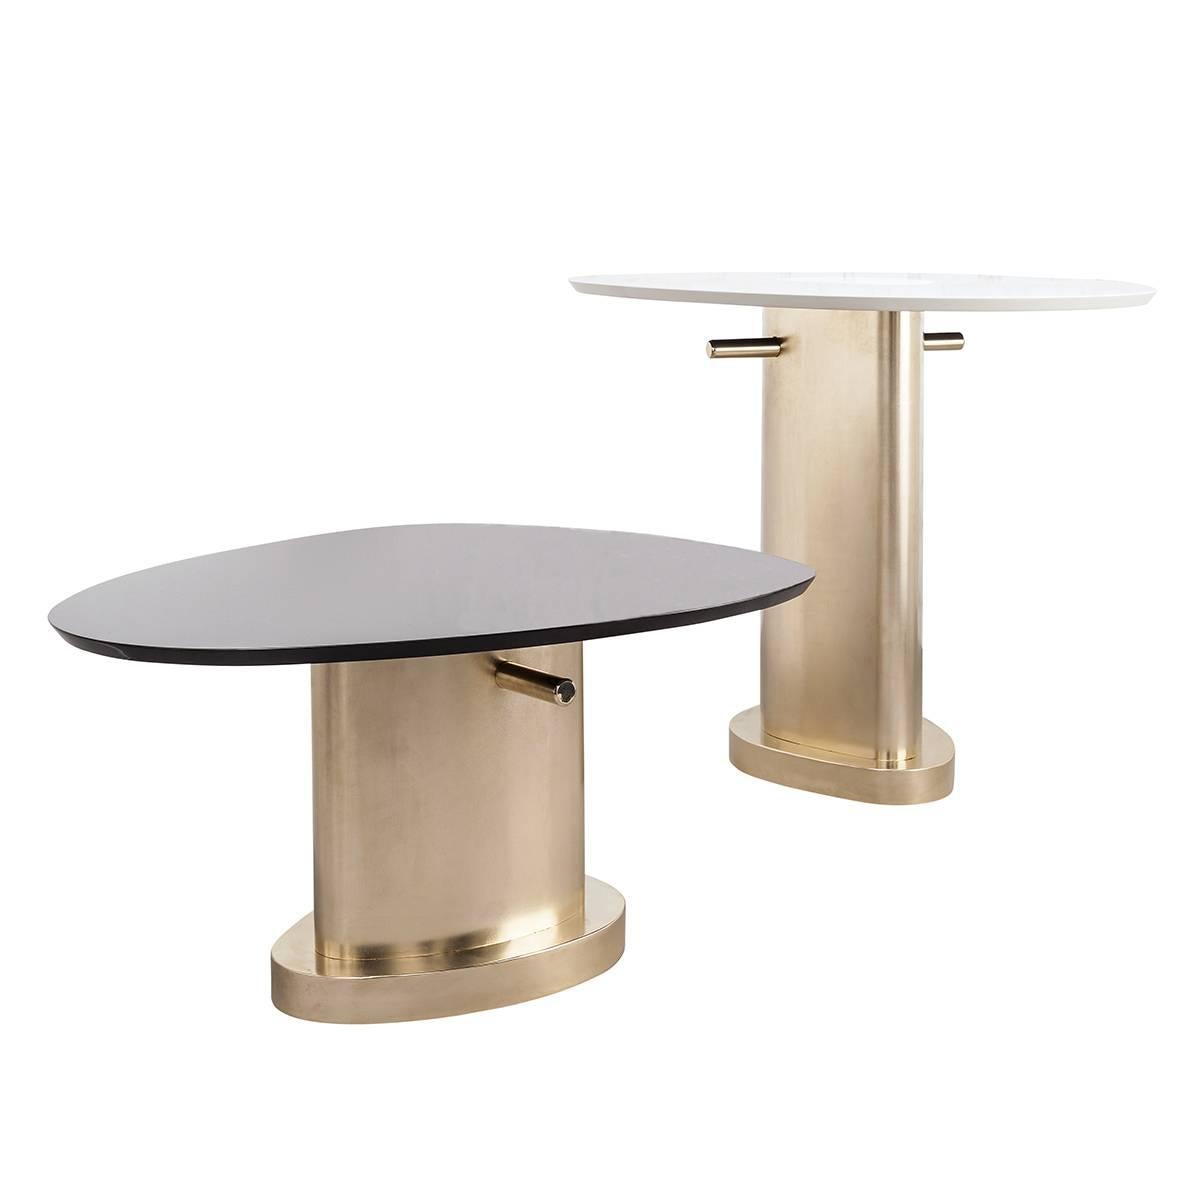 Italian Contemporary m2kr Twins Table Set in Wood and Galvanized Steel, Italy, 2017 For Sale